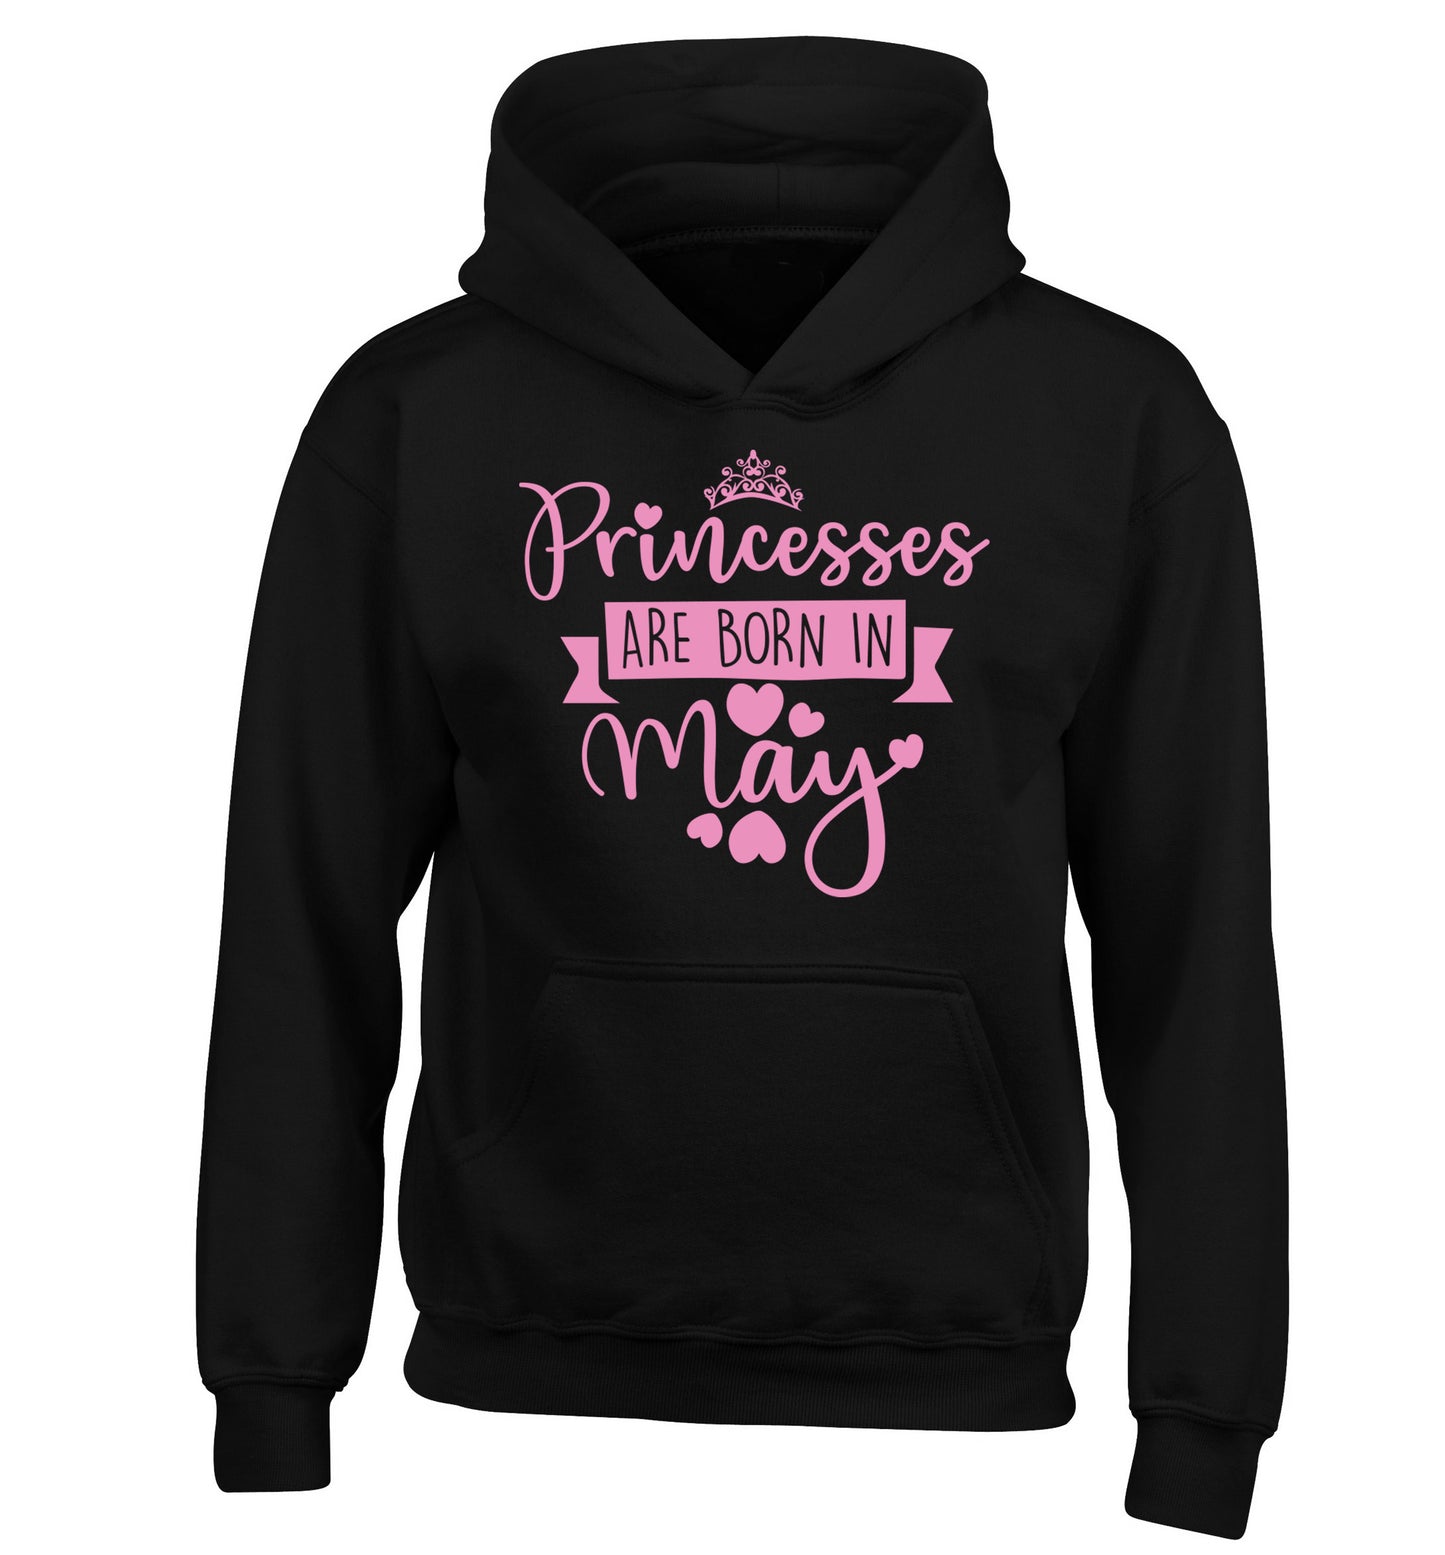 Princesses are born in May children's black hoodie 12-13 Years